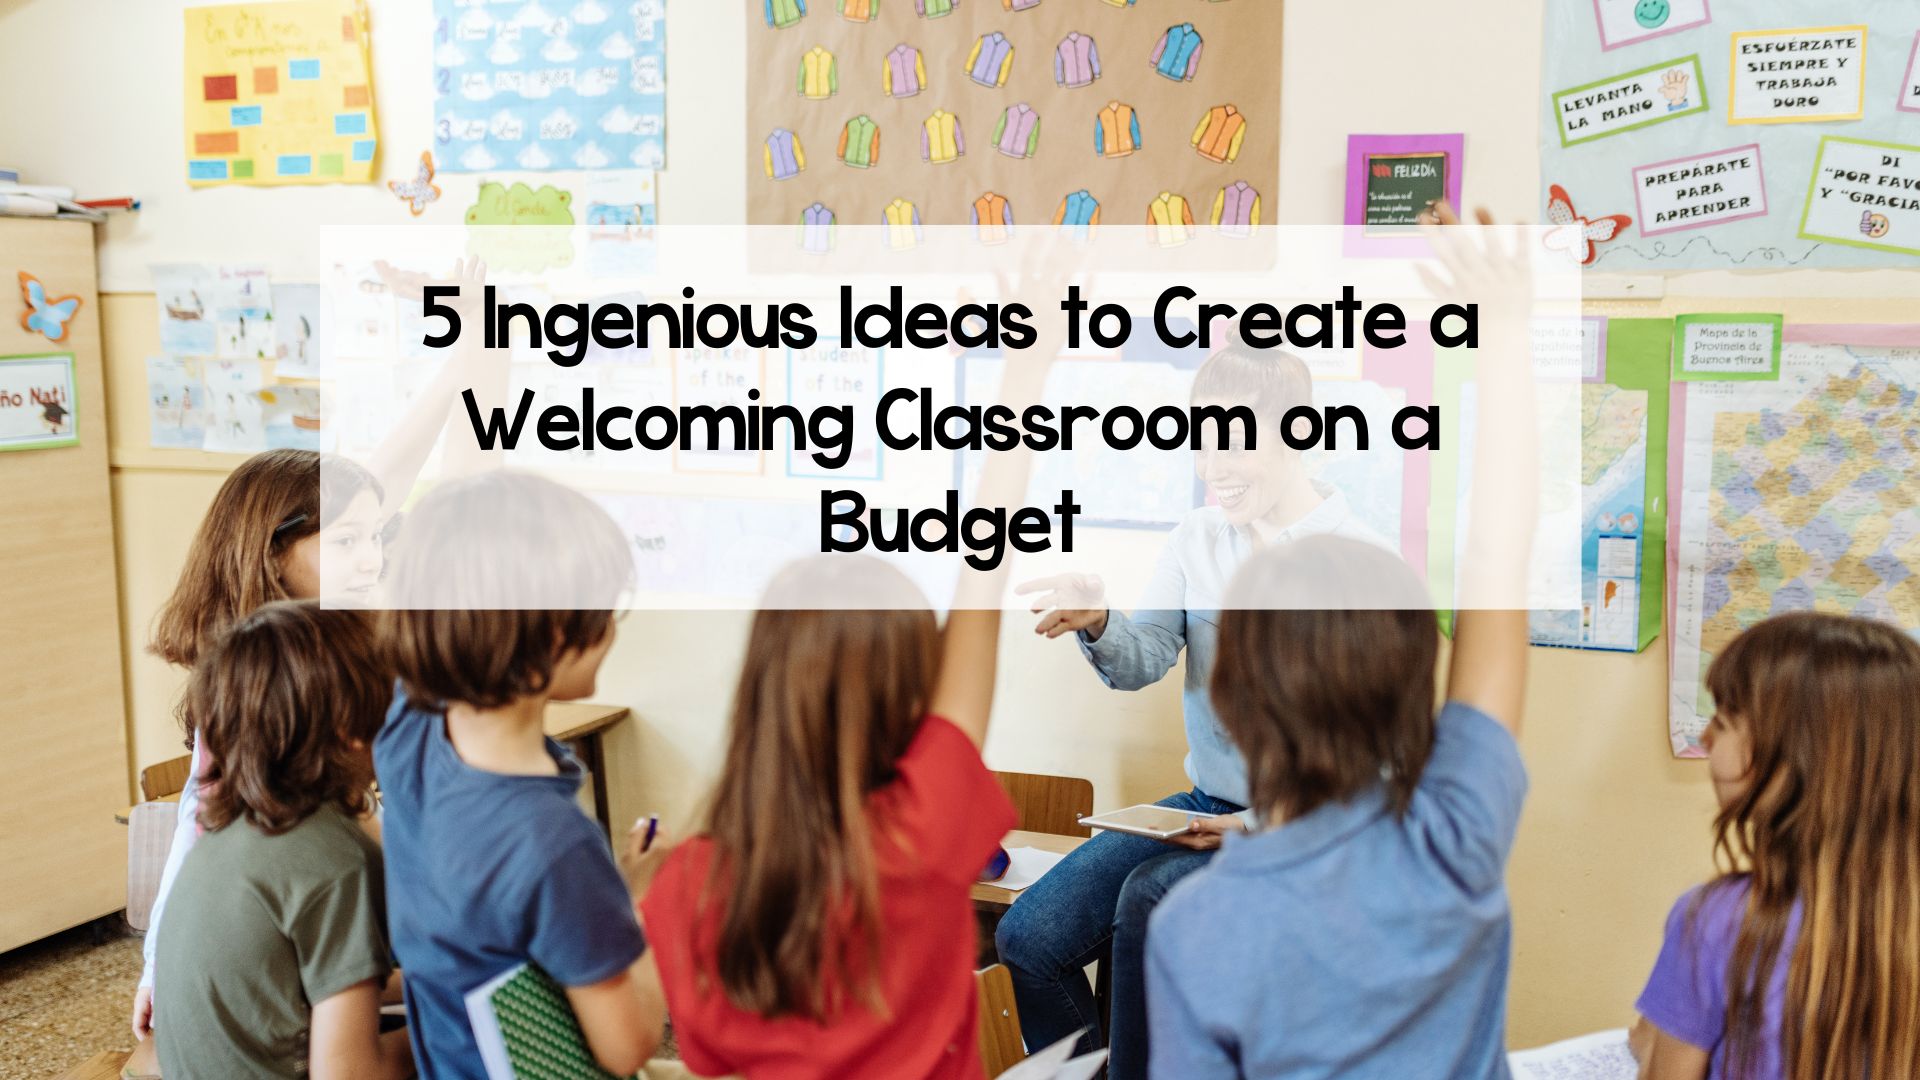 5 Ingenious Ideas to Create a Welcoming Classroom on a Budget